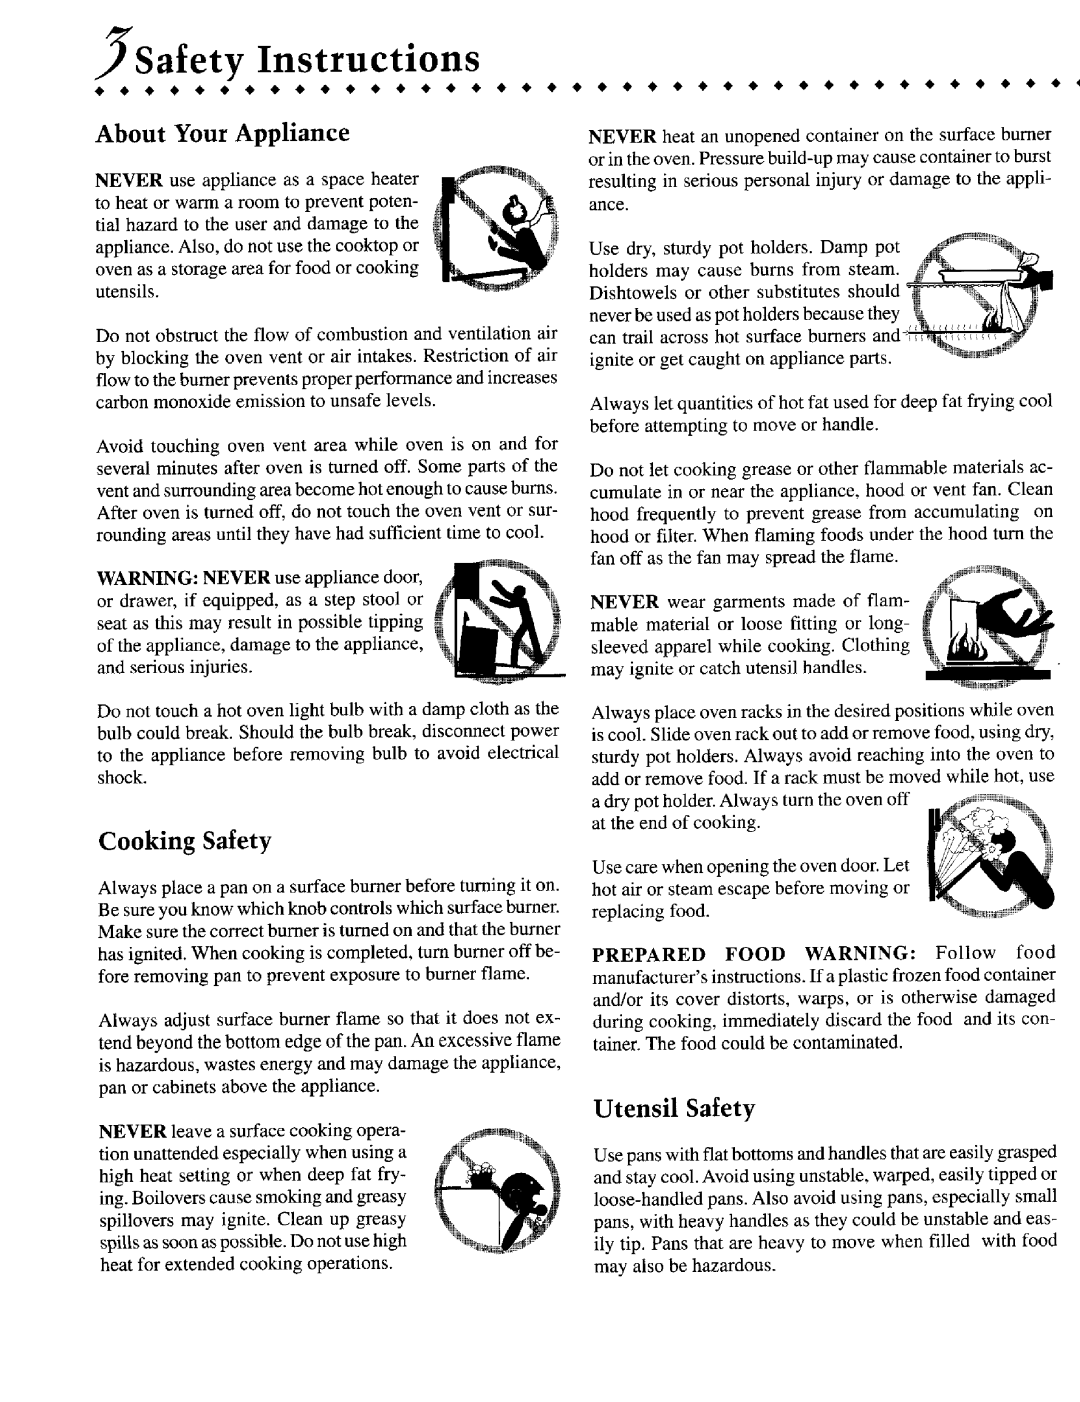 Jenn-Air JGR8855 warranty Safety Instructions, _i IL2N, About Your Appliance, Cooking Safety, Utensil Safety 